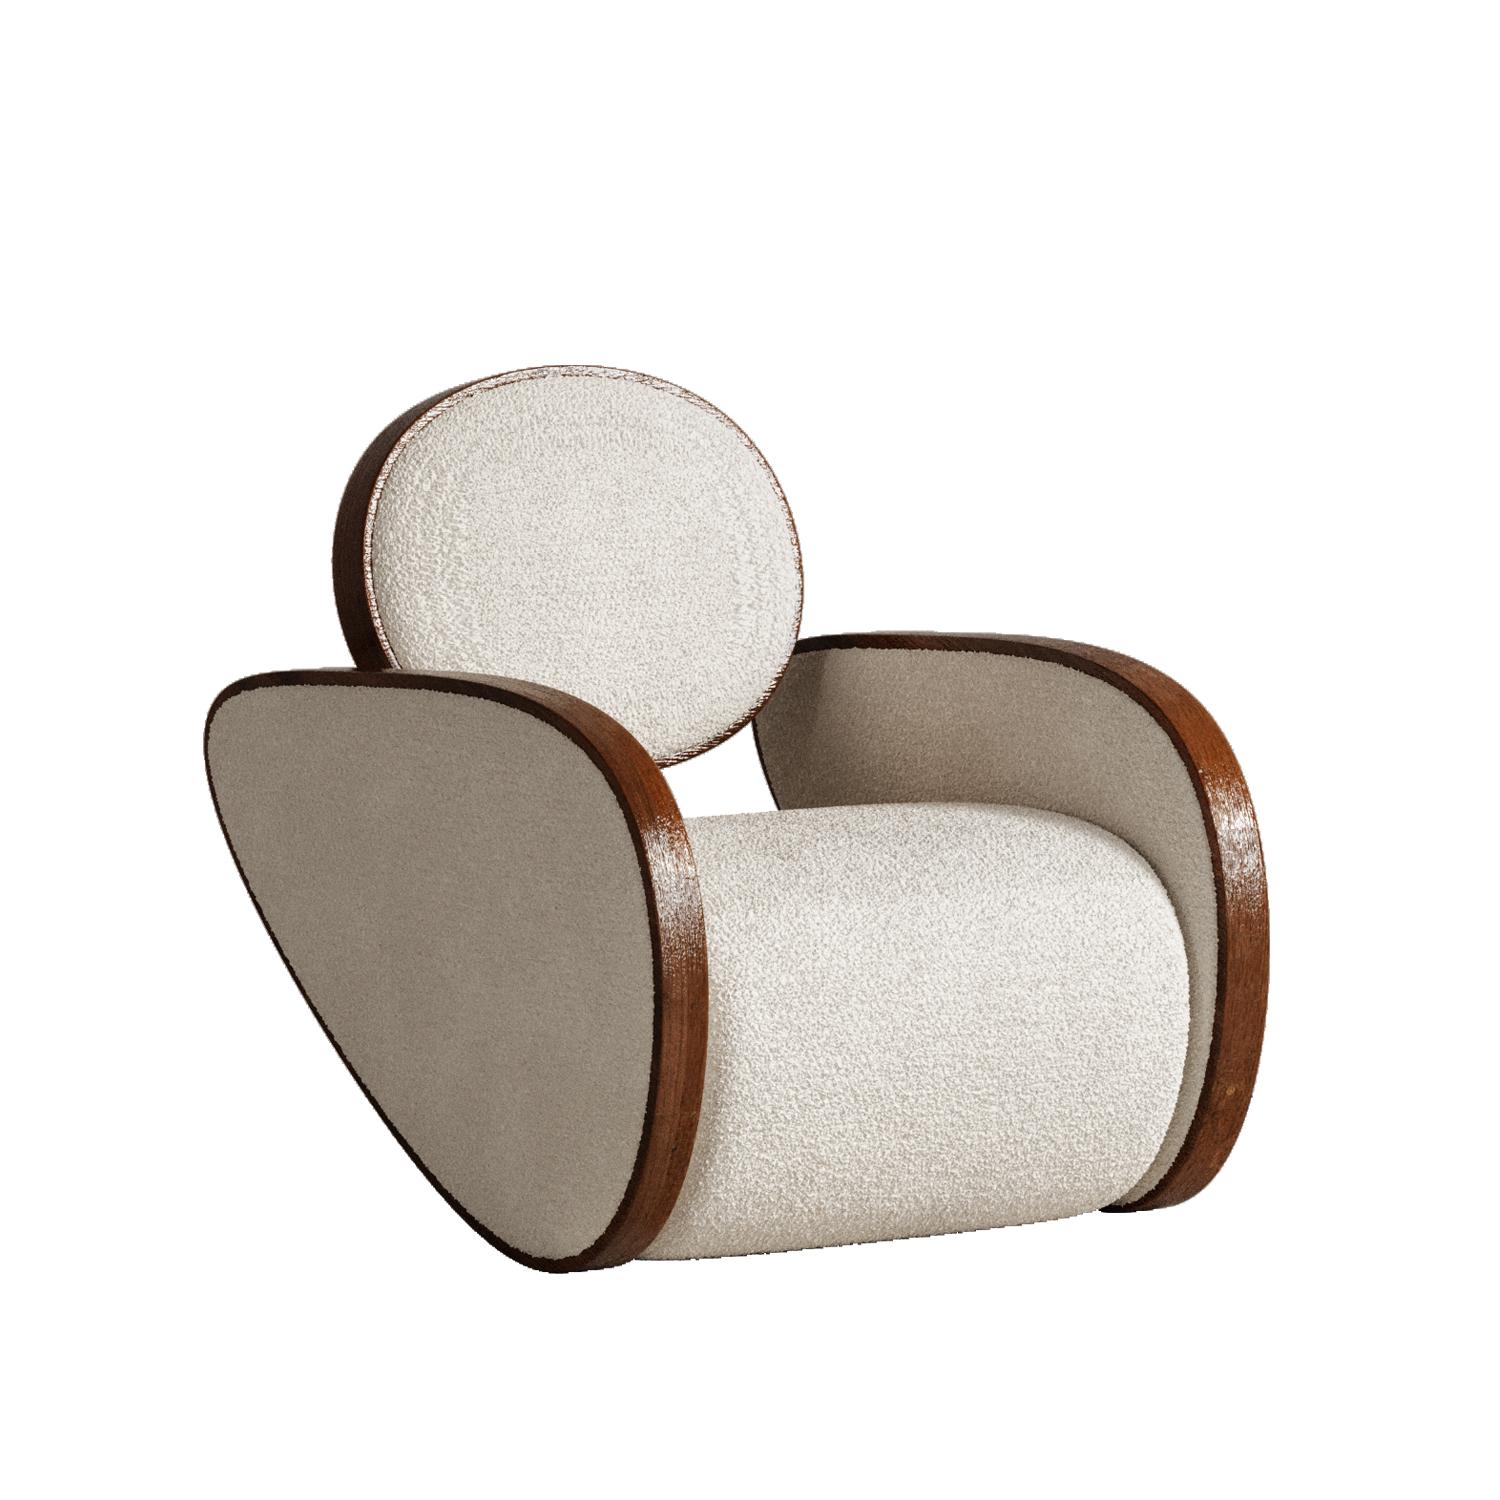 Wood Creamy Nautilus Chair by Plyus Design For Sale